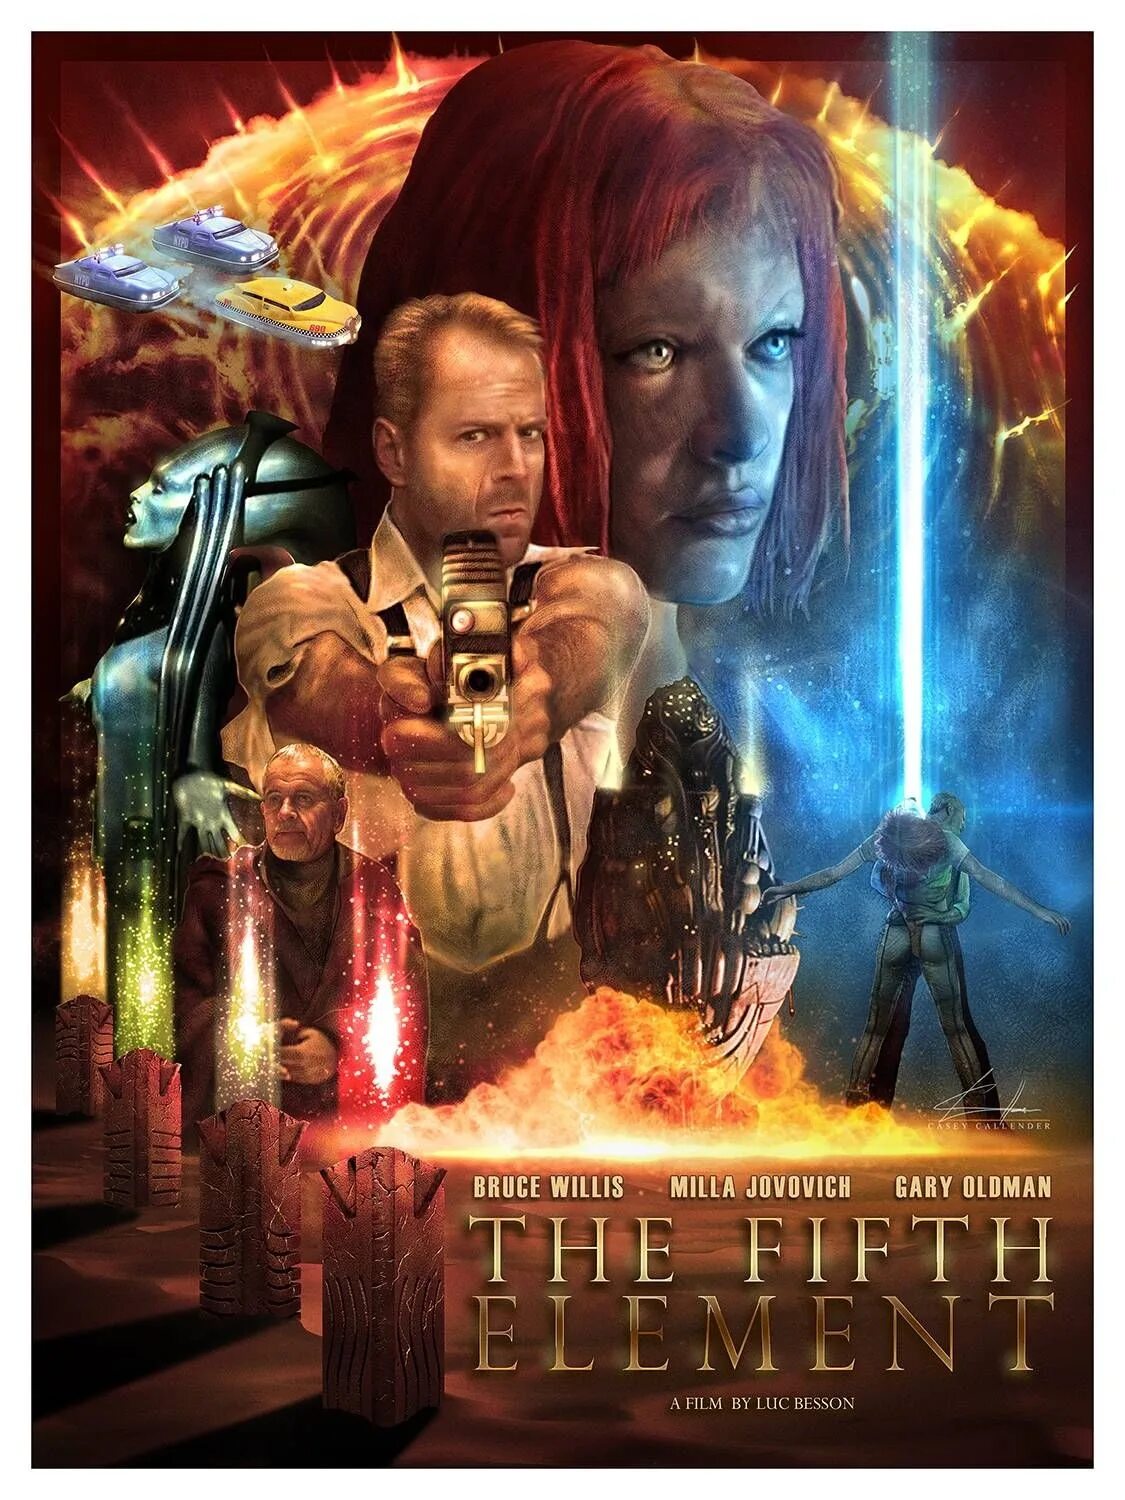 Пятый элемент 1997 Постер. The Fifth element 1997 poster.